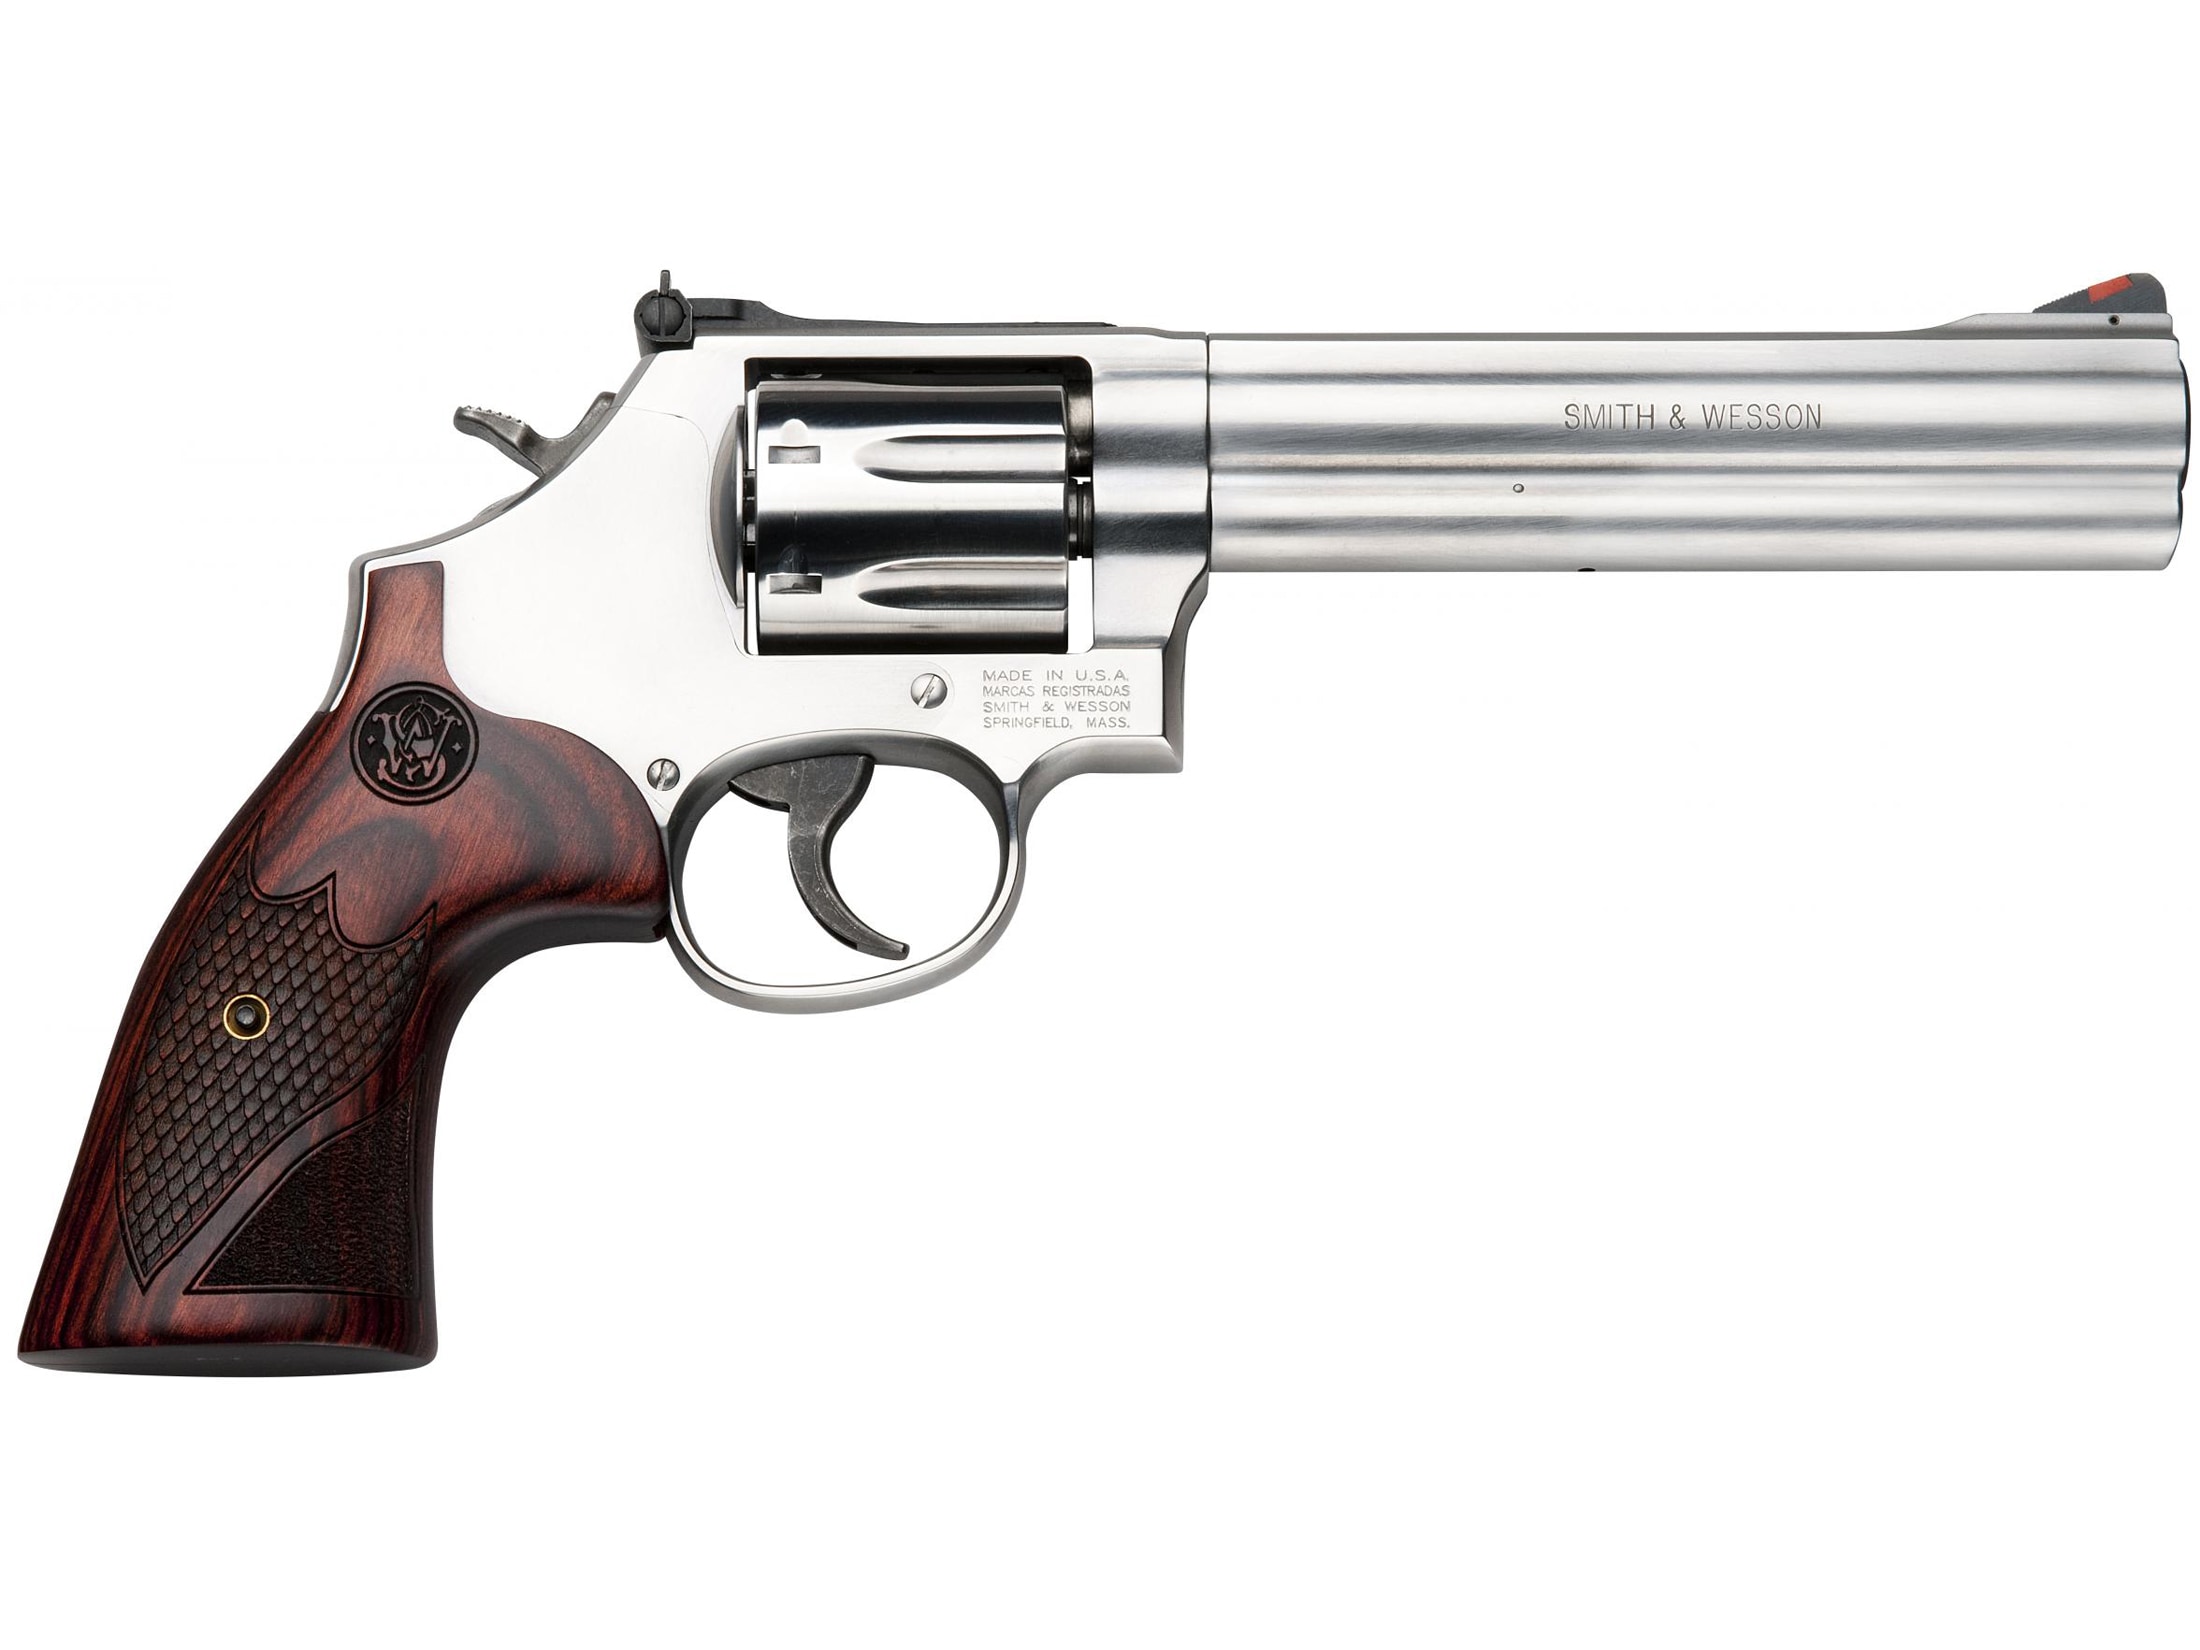 Smith & Wesson Model 686 Plus Deluxe Revolver 357 Magnum 6" Barrel 7-Round Stainless Wood